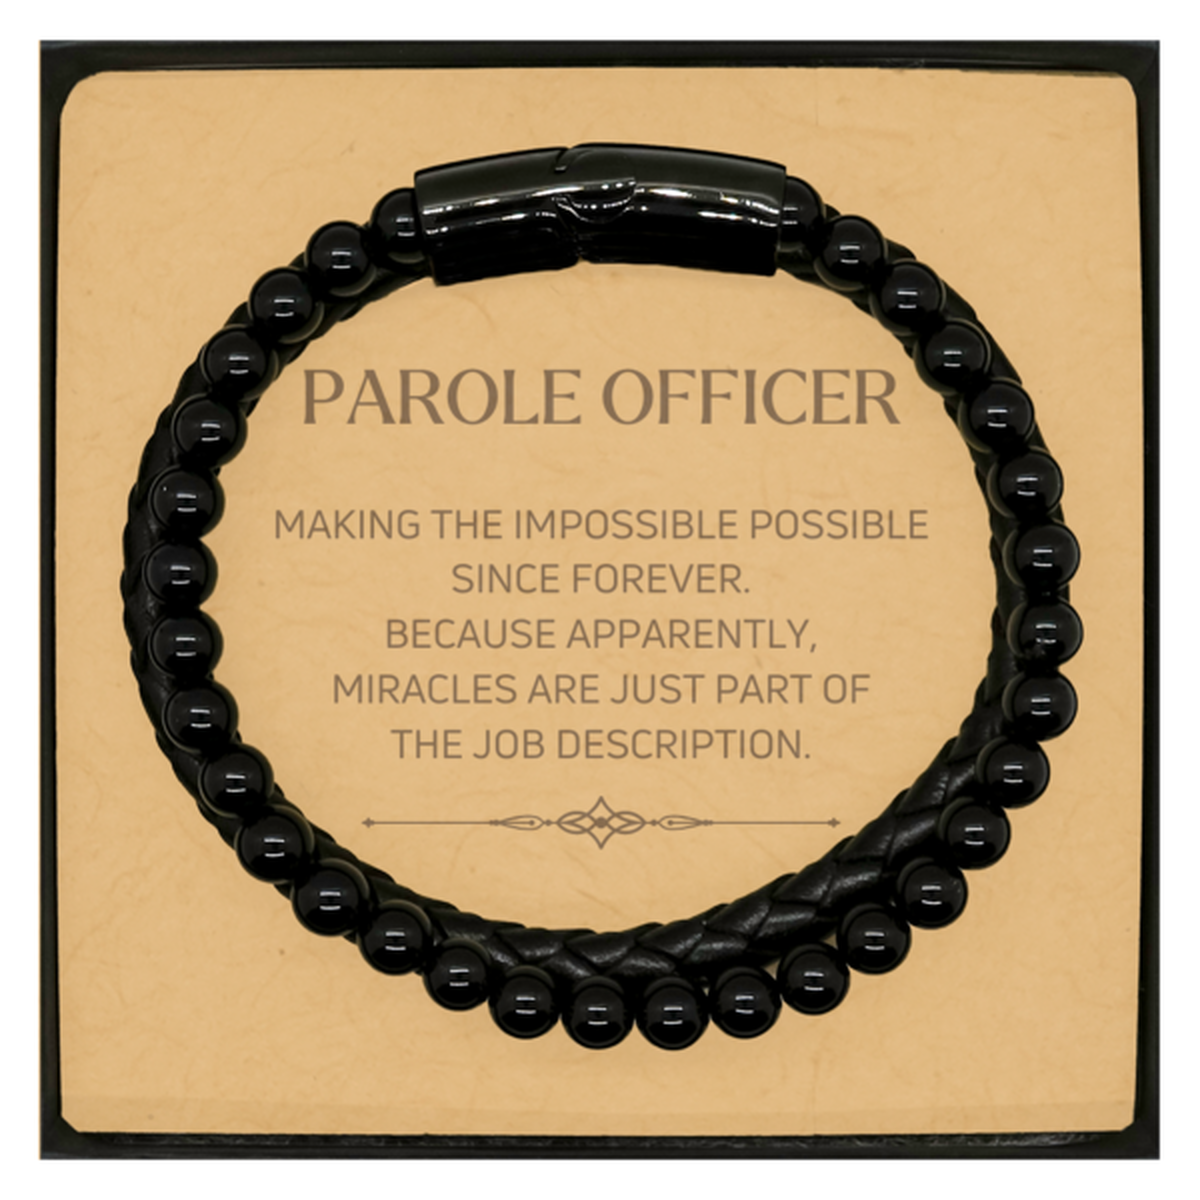 Funny Parole Officer Gifts, Miracles are just part of the job description, Inspirational Birthday Christmas Stone Leather Bracelets For Parole Officer, Men, Women, Coworkers, Friends, Boss